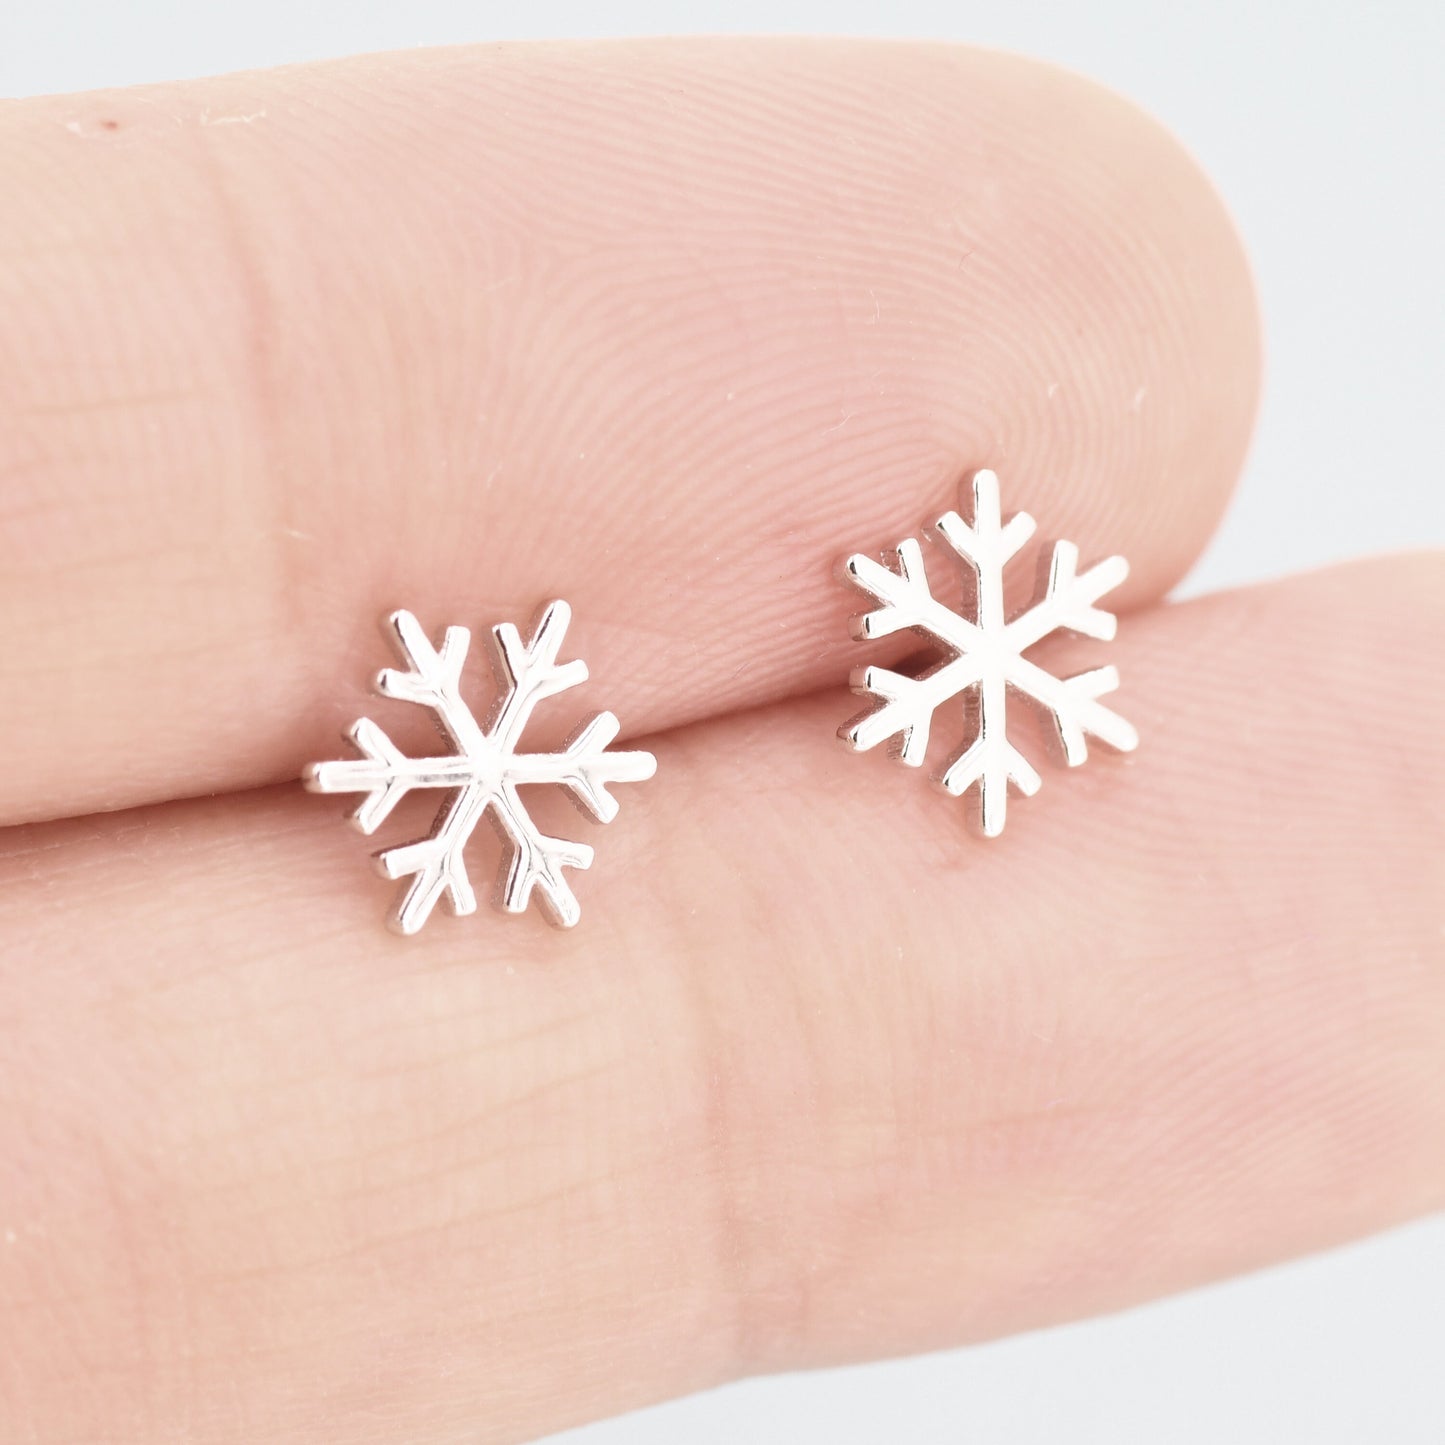 Snowflake Stud Earrings in Sterling Silver, Snow Earrings, Available in Three Finishes - Silver, Gold and Rose Gold, Dainty Snowflake